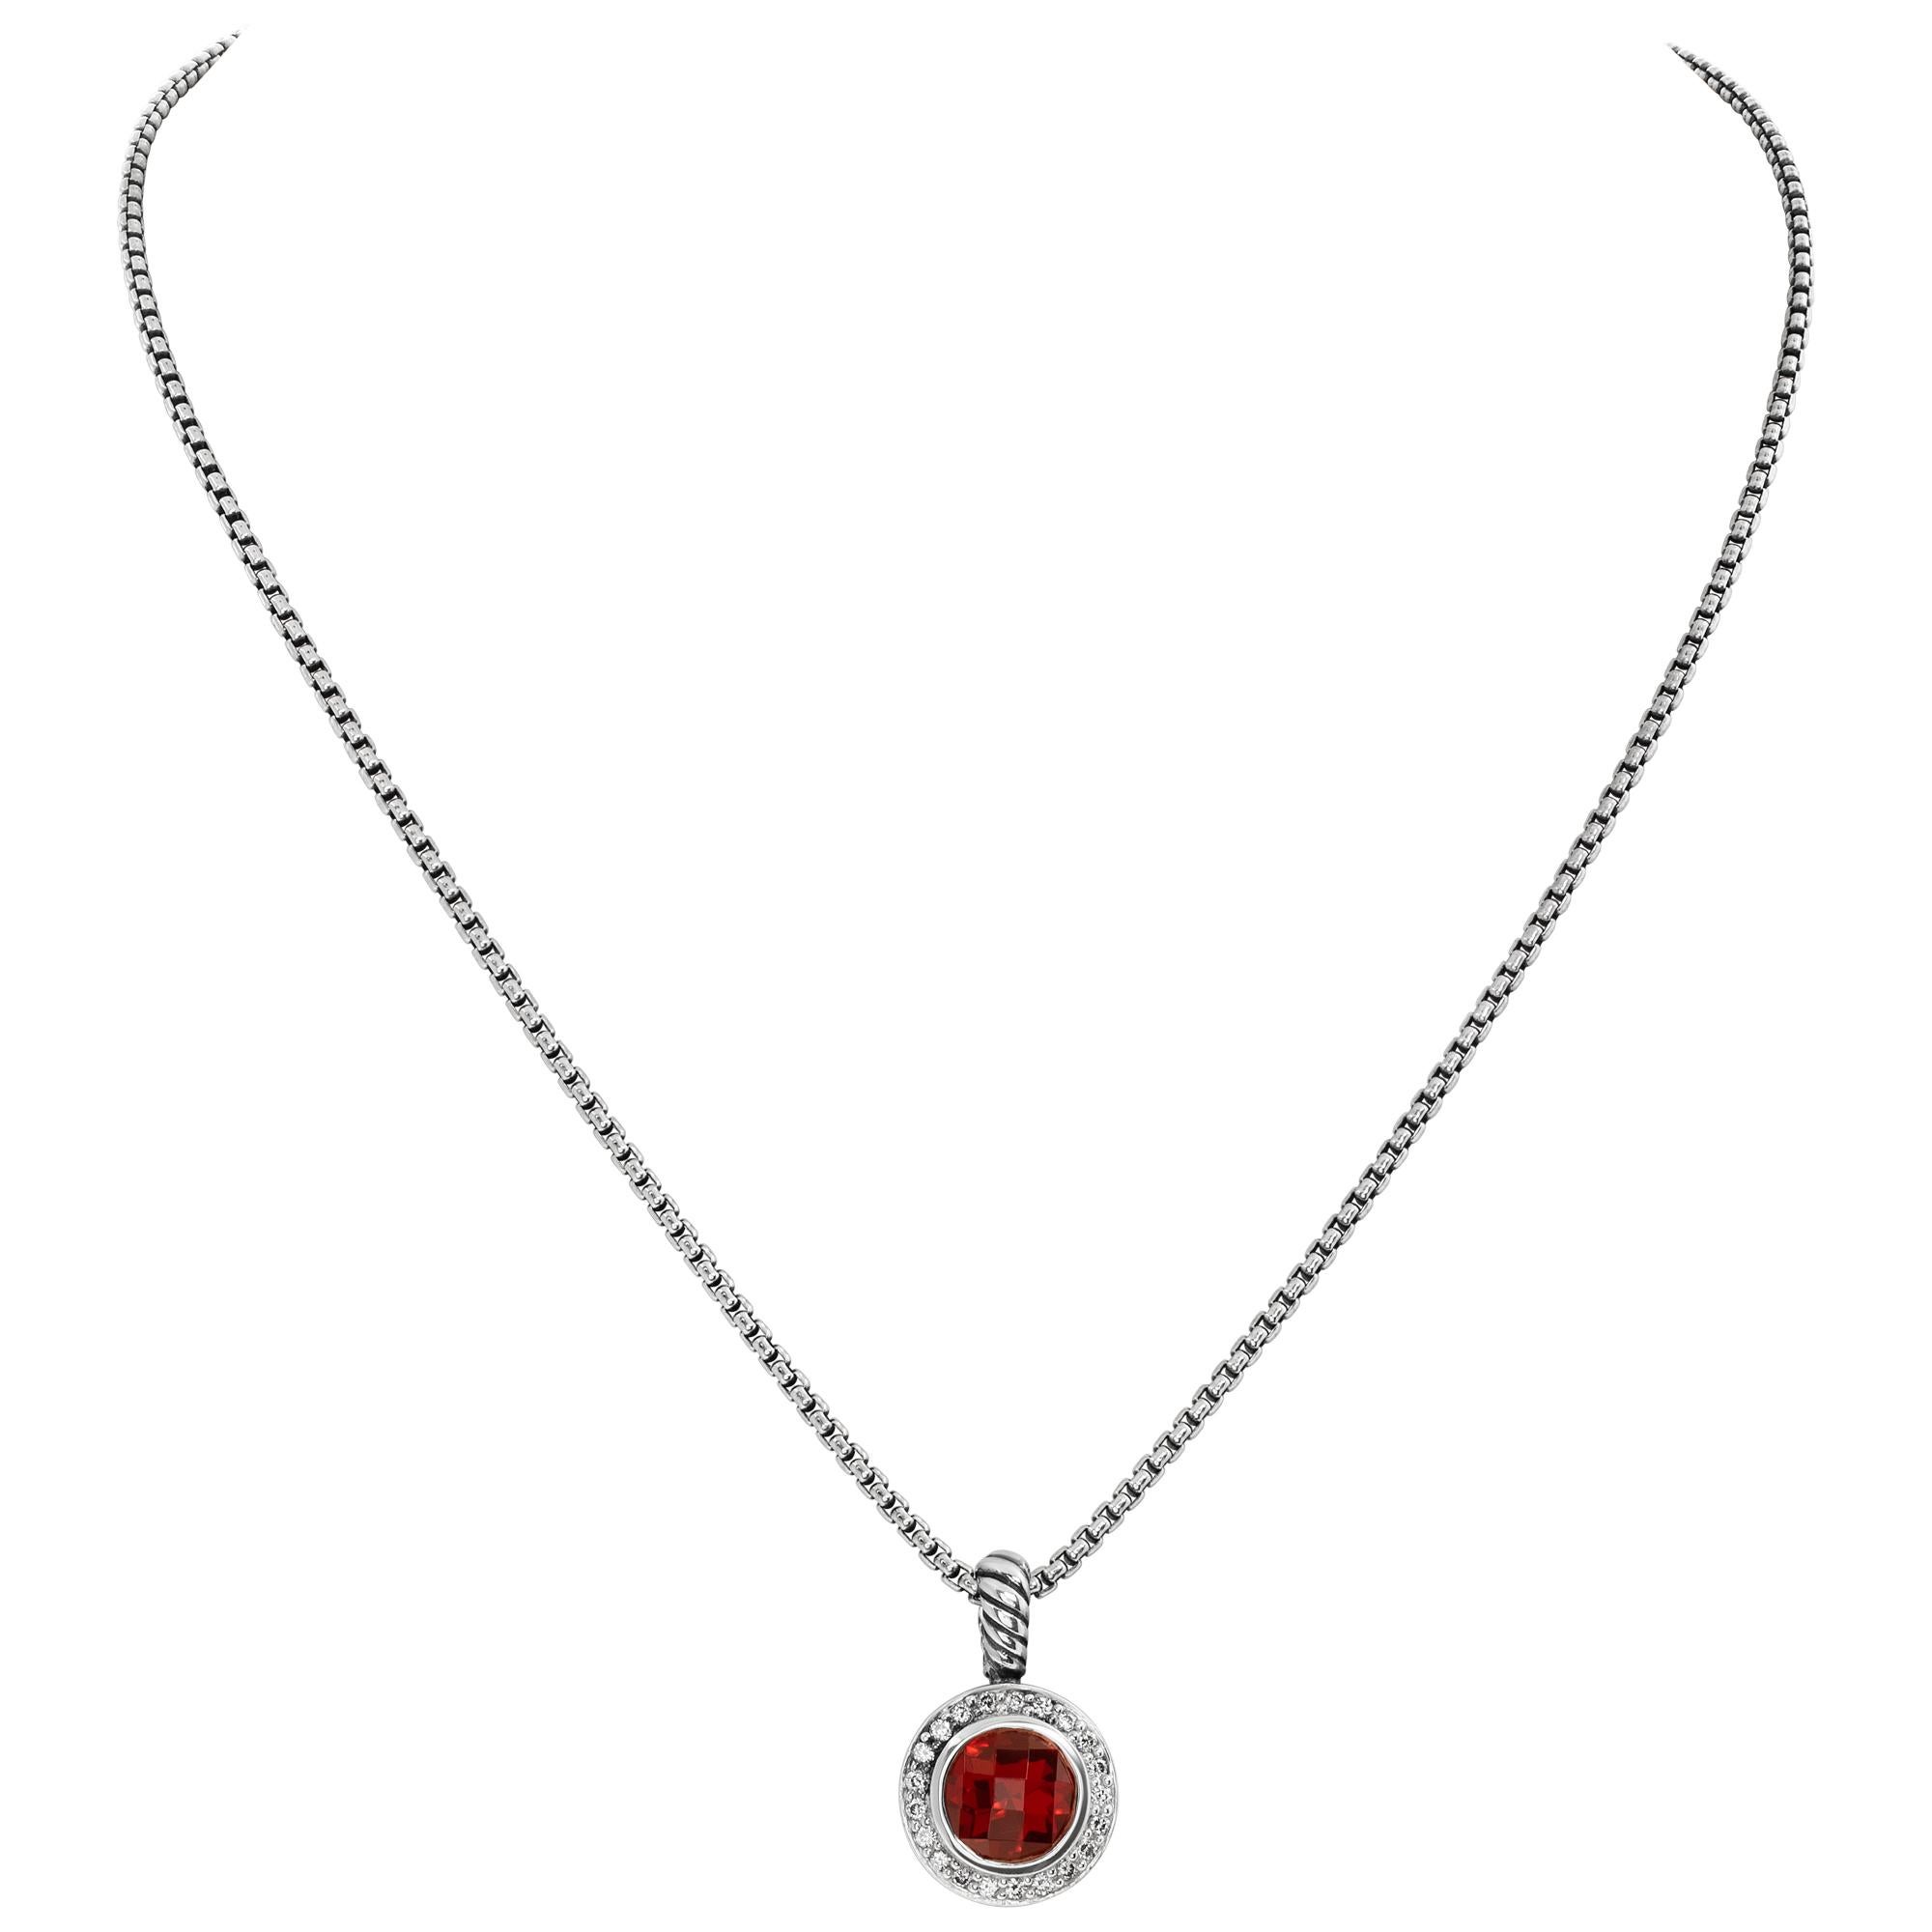 David Yurman Petit Albion garnet and diamonds pendant on sterling silver chain with 14k DY accent. Length 16 inches. Size of the pendant 21mm x 13 mm.